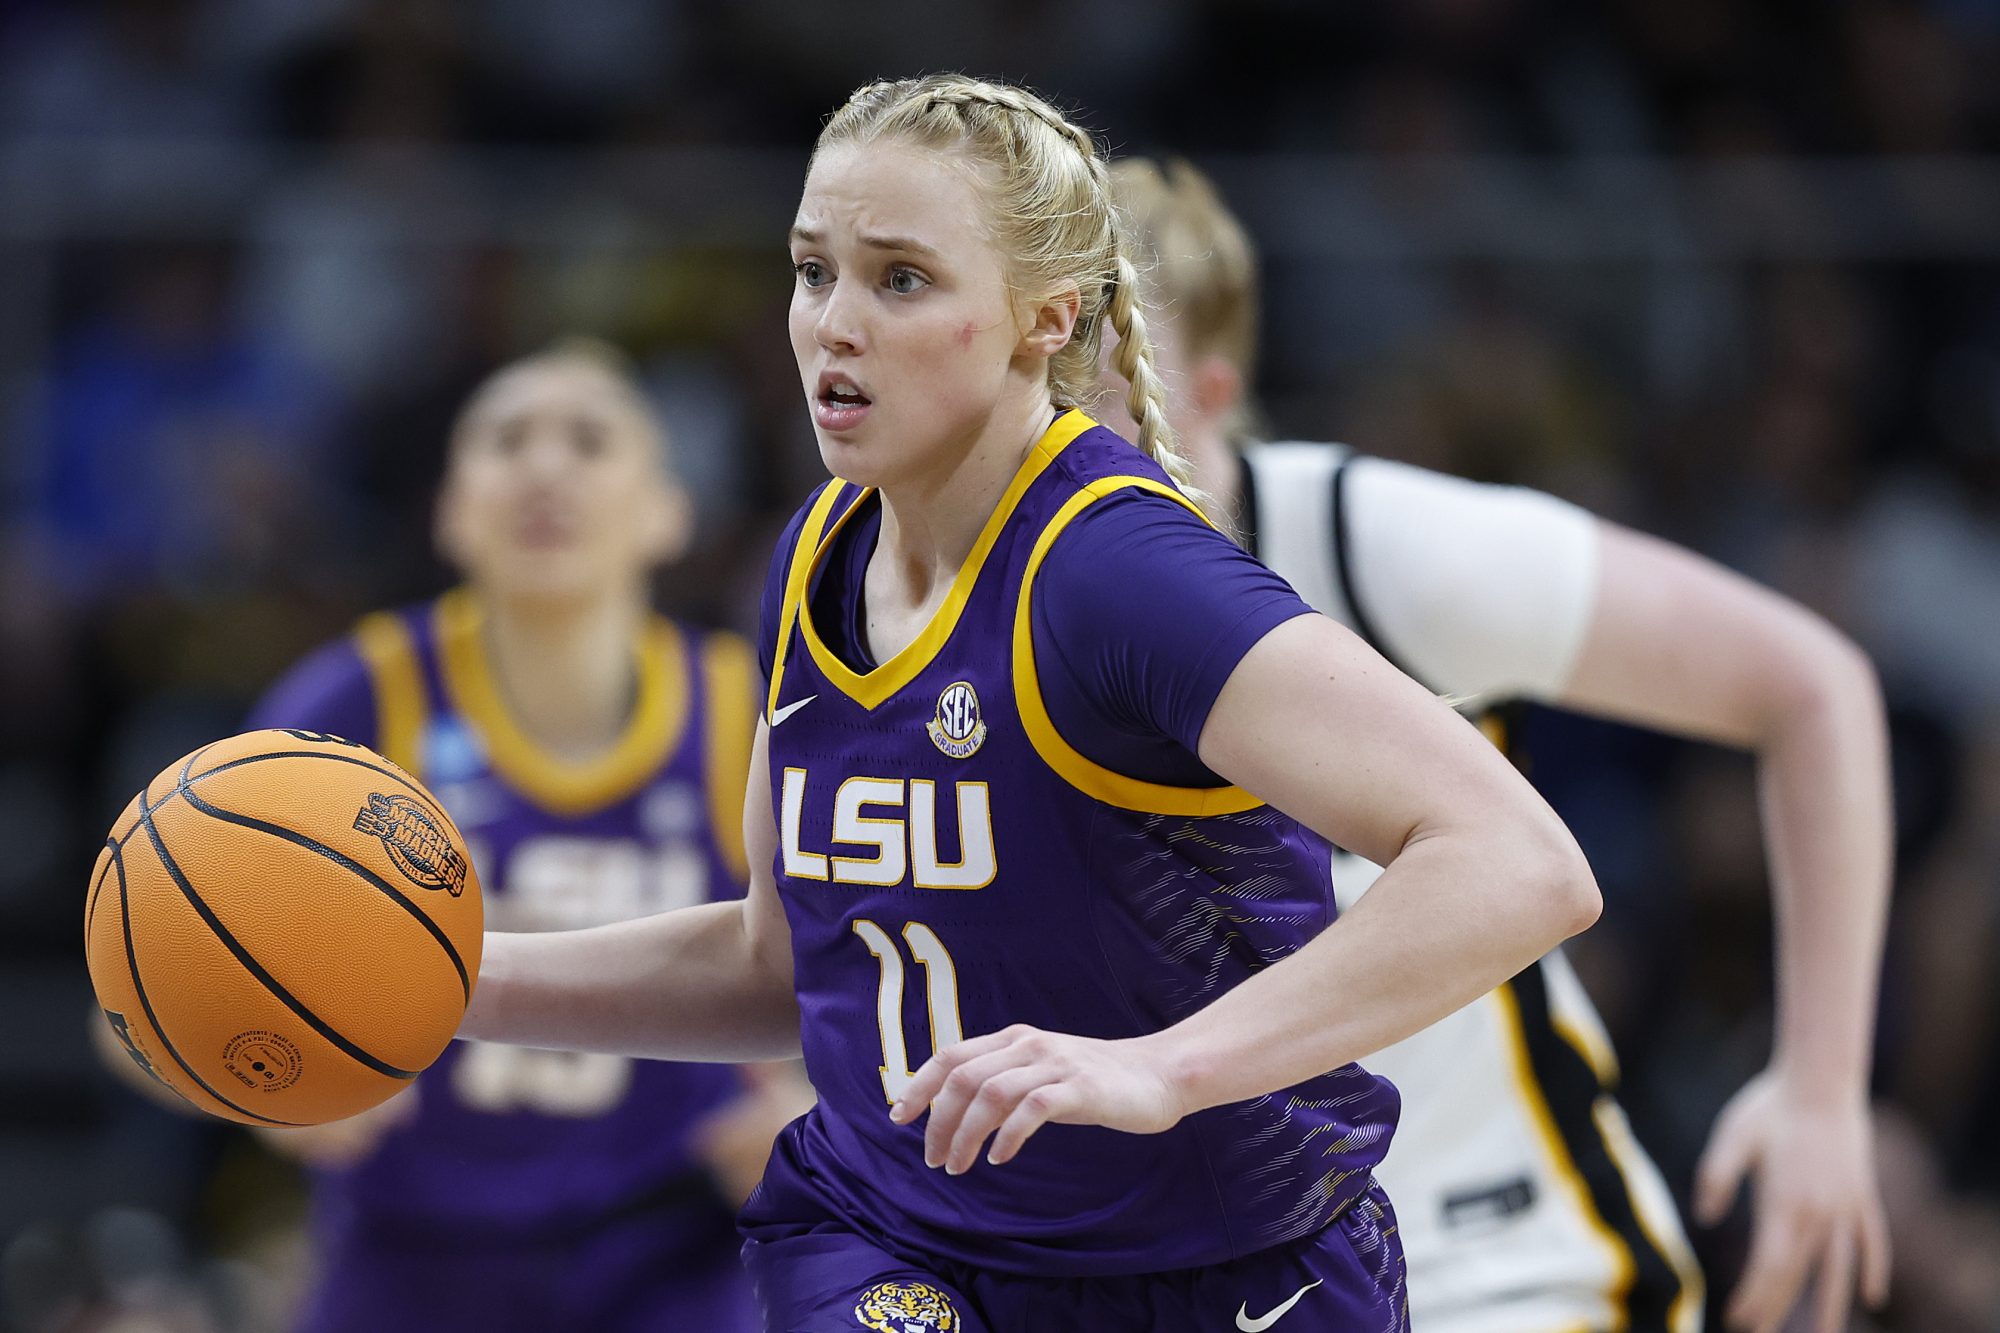 Hailey Van Lith is transferring to TCU after one year at LSU.